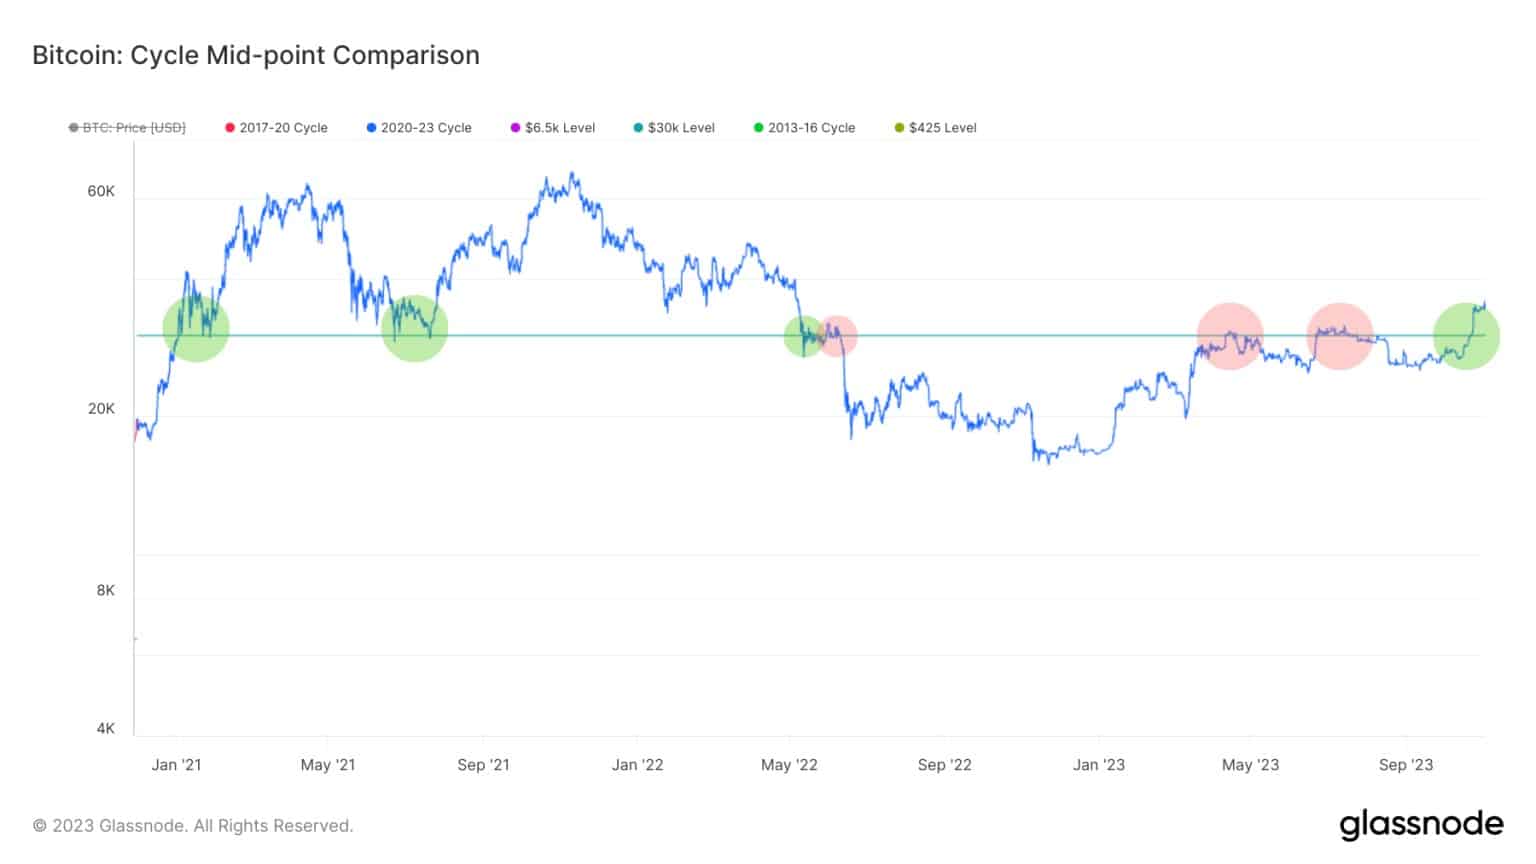 Figure 1: BTC price and bull/bear pivot of the 2020 - 2023 cycle